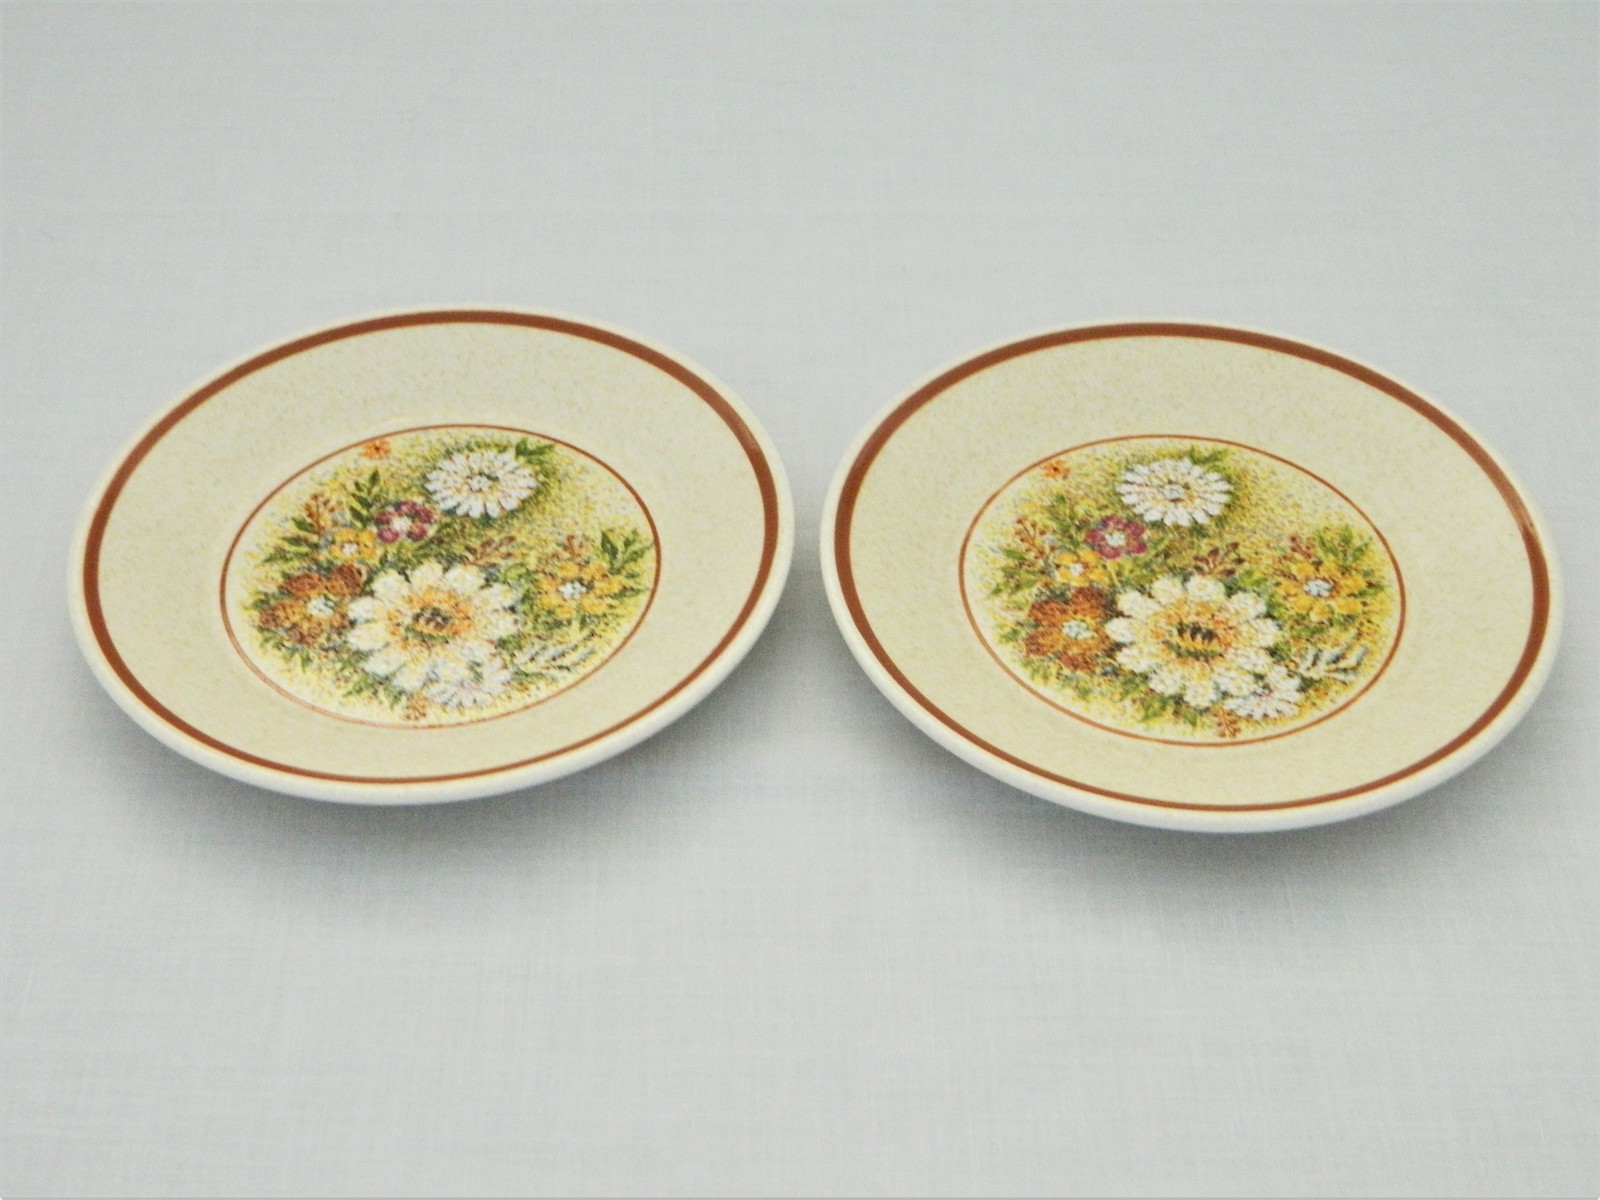 Primary image for Temper-Ware by Lenox – 2 bread/butter plates – Magic Garden 